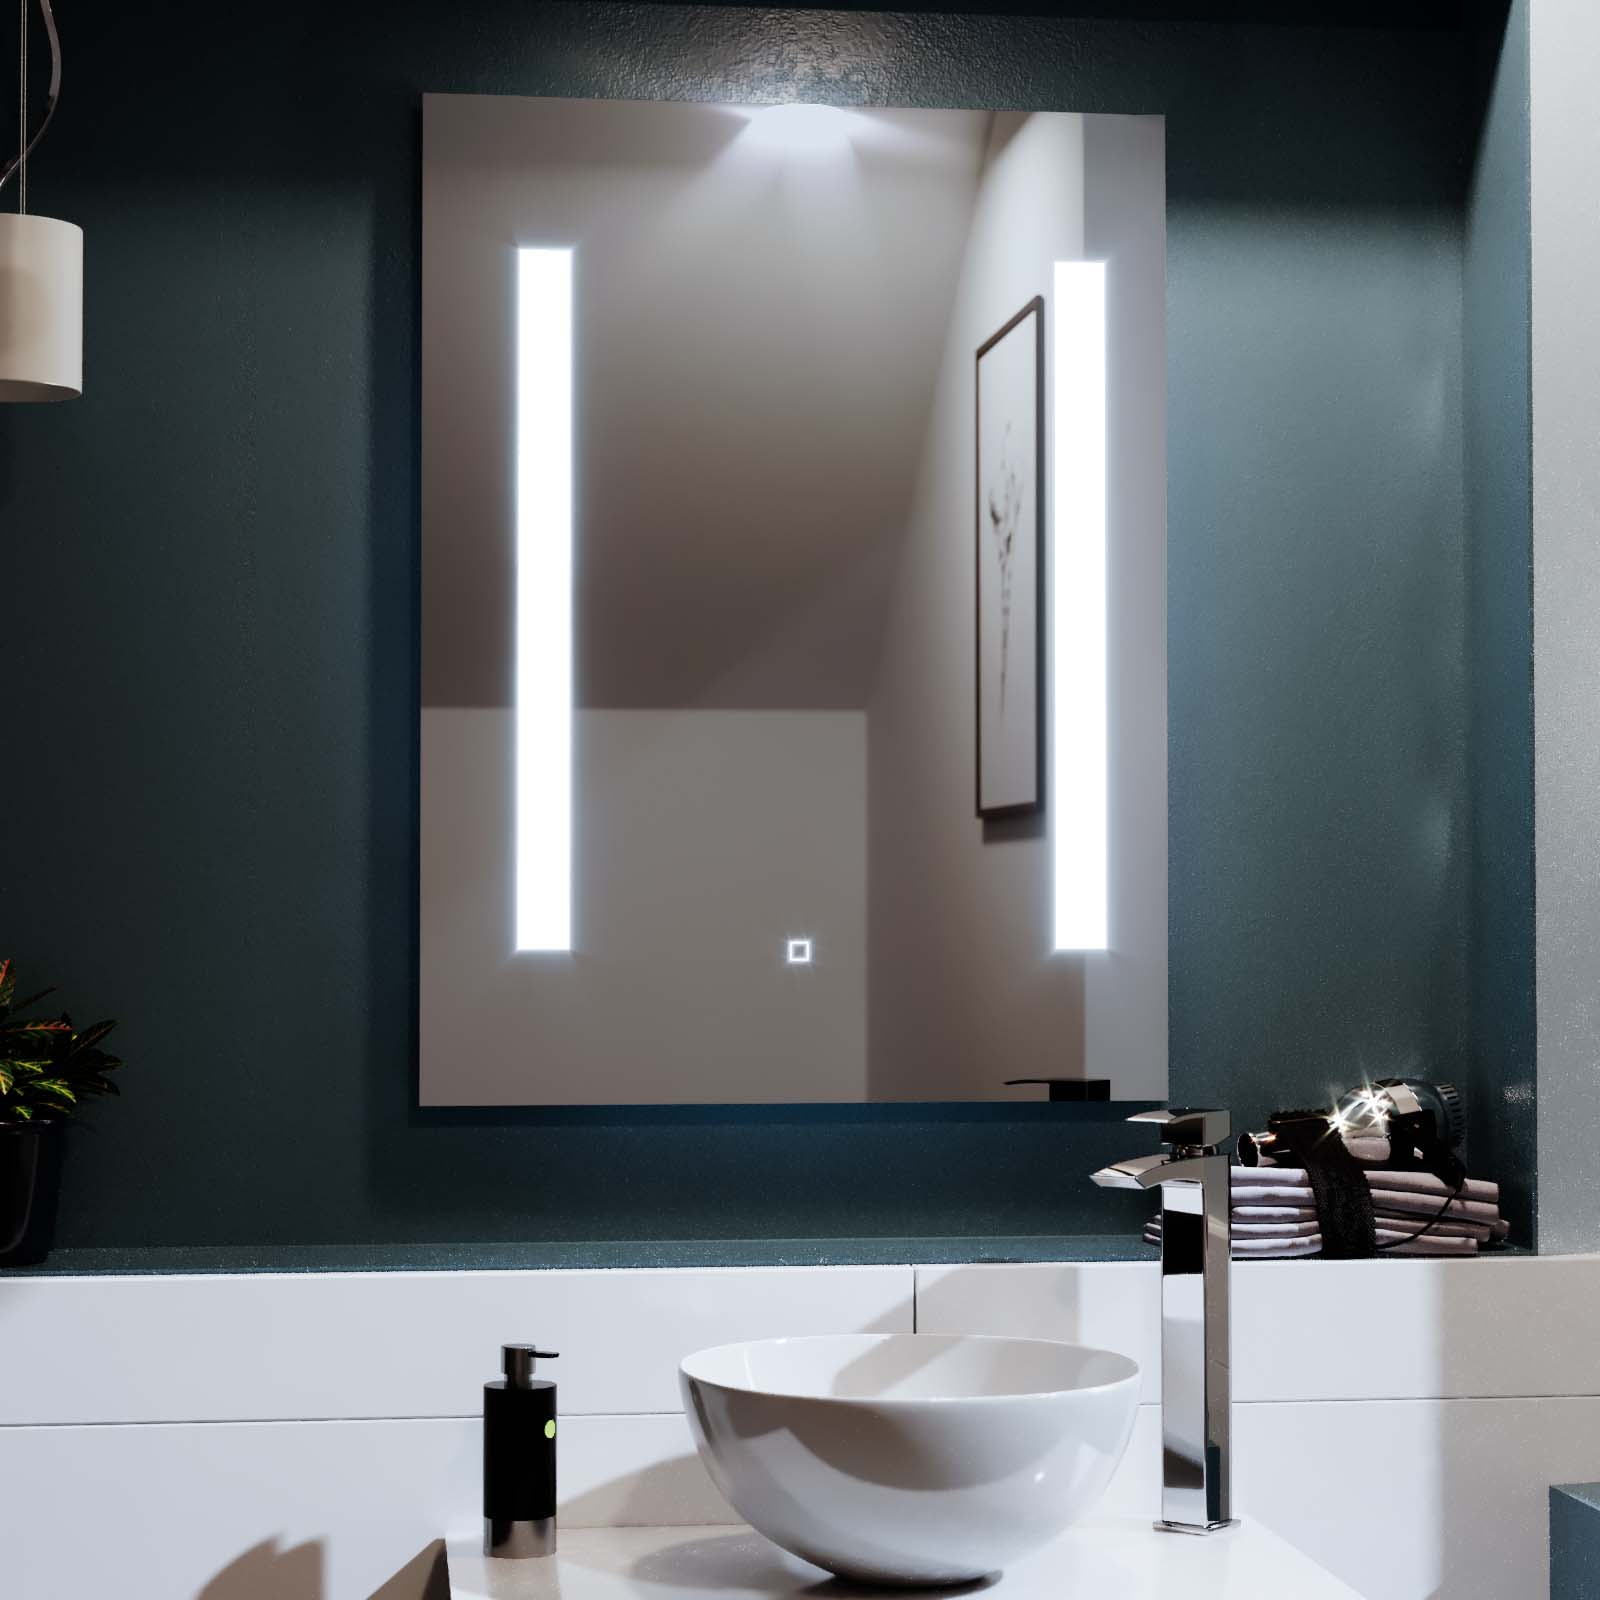 Large 600x800 mm Illuminated LED Bathroom Mirror with Anti Fog and Touch Switch